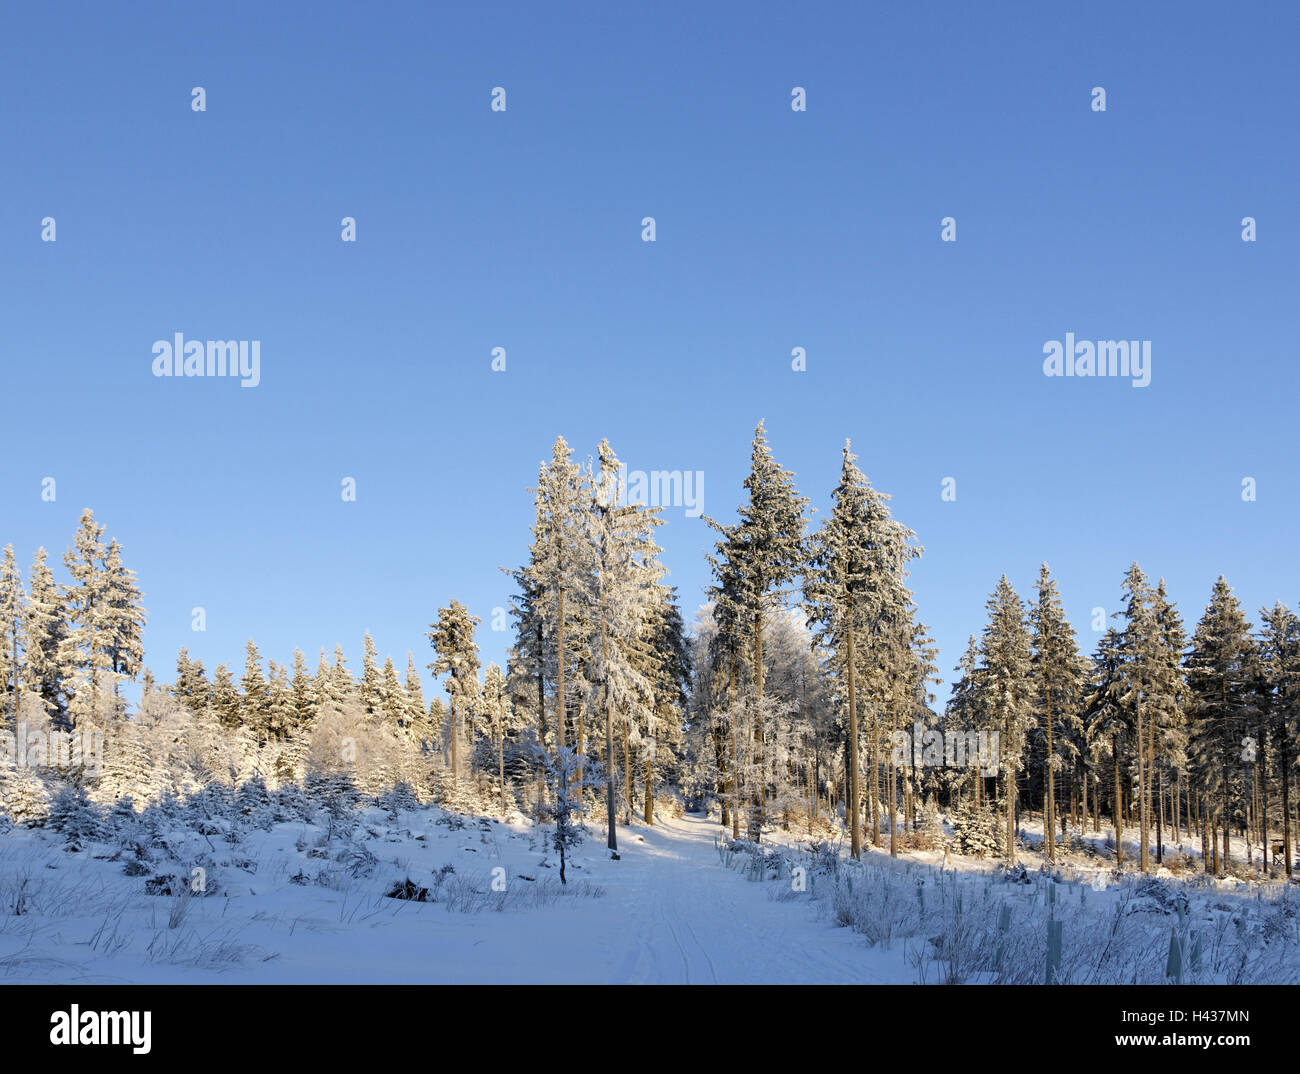 Germany, Thuringia, Thuringian wood, Kickelhahn, wood, snow-covered, morning light, place of interest, destination, tourism, scenery, hill, tuning, morning, snow, season, winter, trees, nature, sunny, mountain, heaven, blue, cloudless, Stock Photo